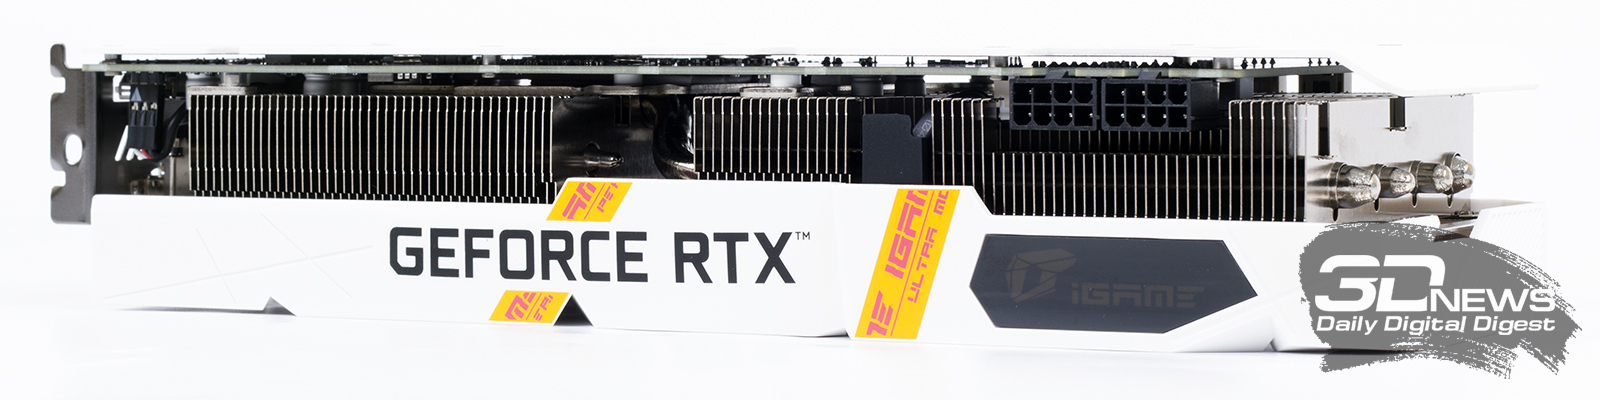 Rtx 3060 colorful ultra w 12g. Colorful IGAME GEFORCE RTX 3060 Ultra w OC 12g l-v. Gigabyte 3060 Gaming OC 12g. IGAME Center.